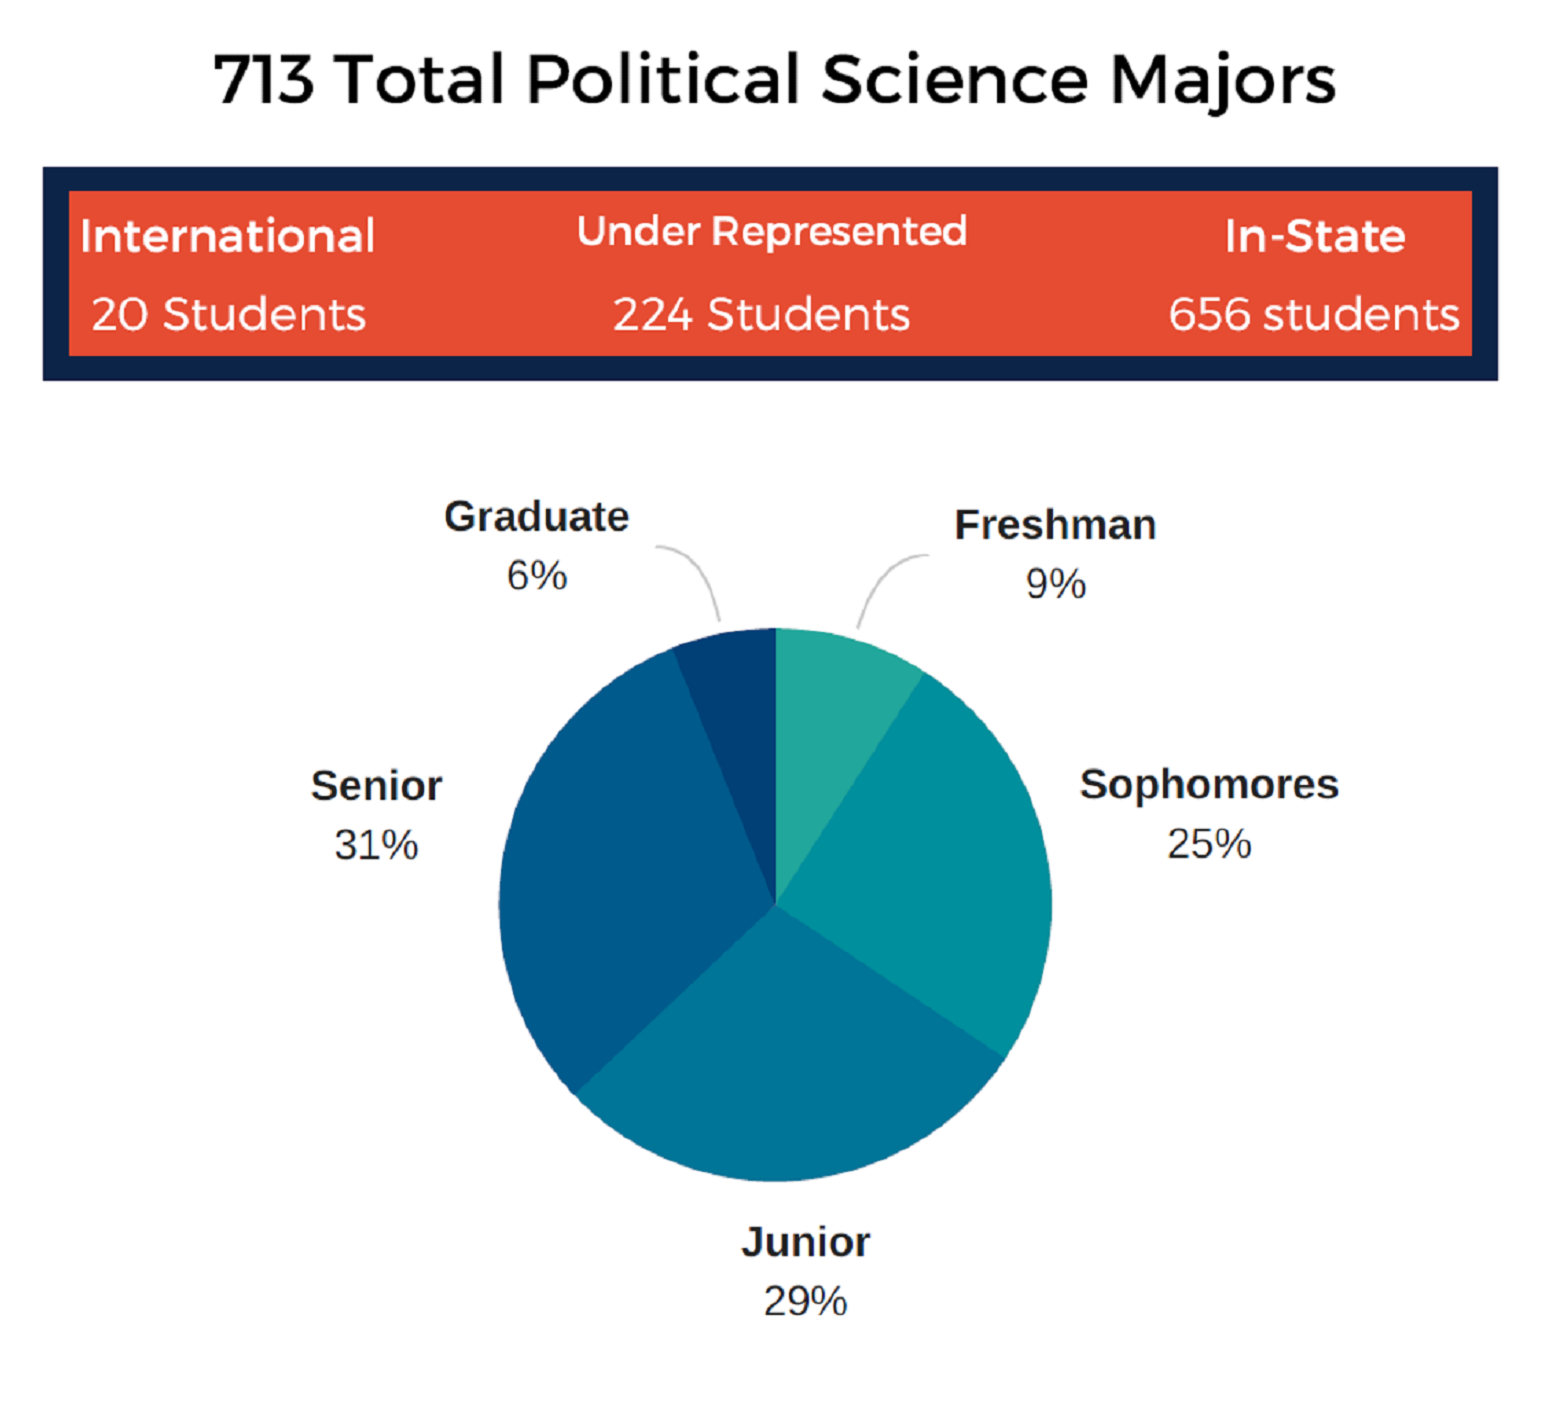 Pie chart showing political science majors by class standing